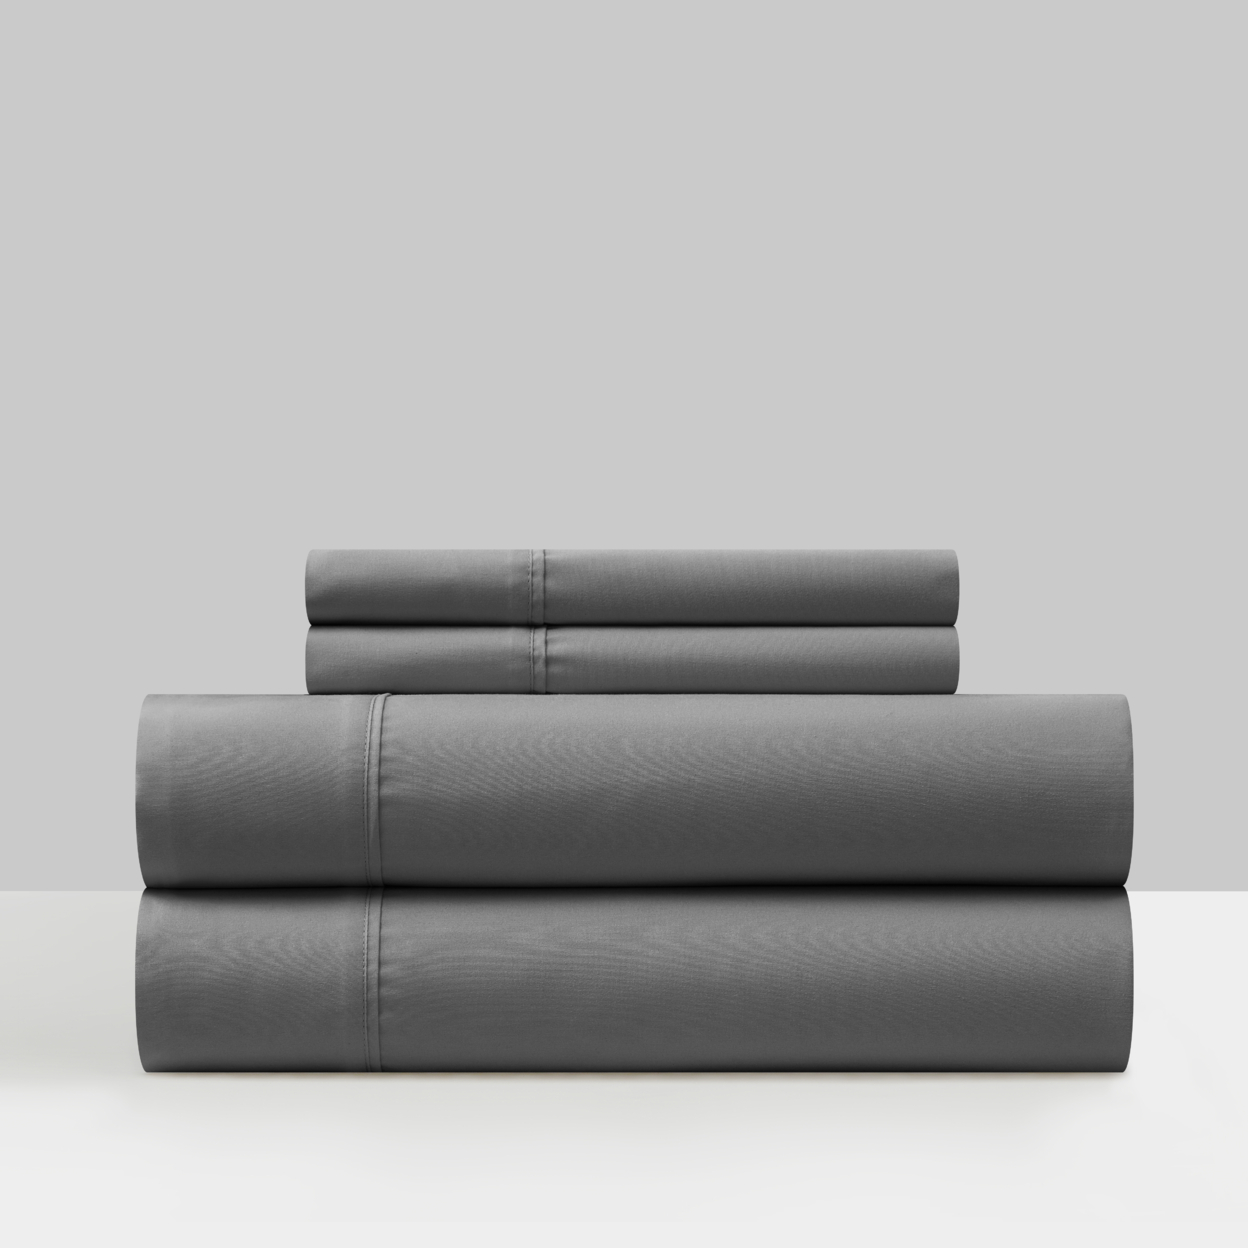 Shton 3 Or 4 Piece Sheet Set Super Soft Solid Color With Piping Flange Edge - Grey, Queen